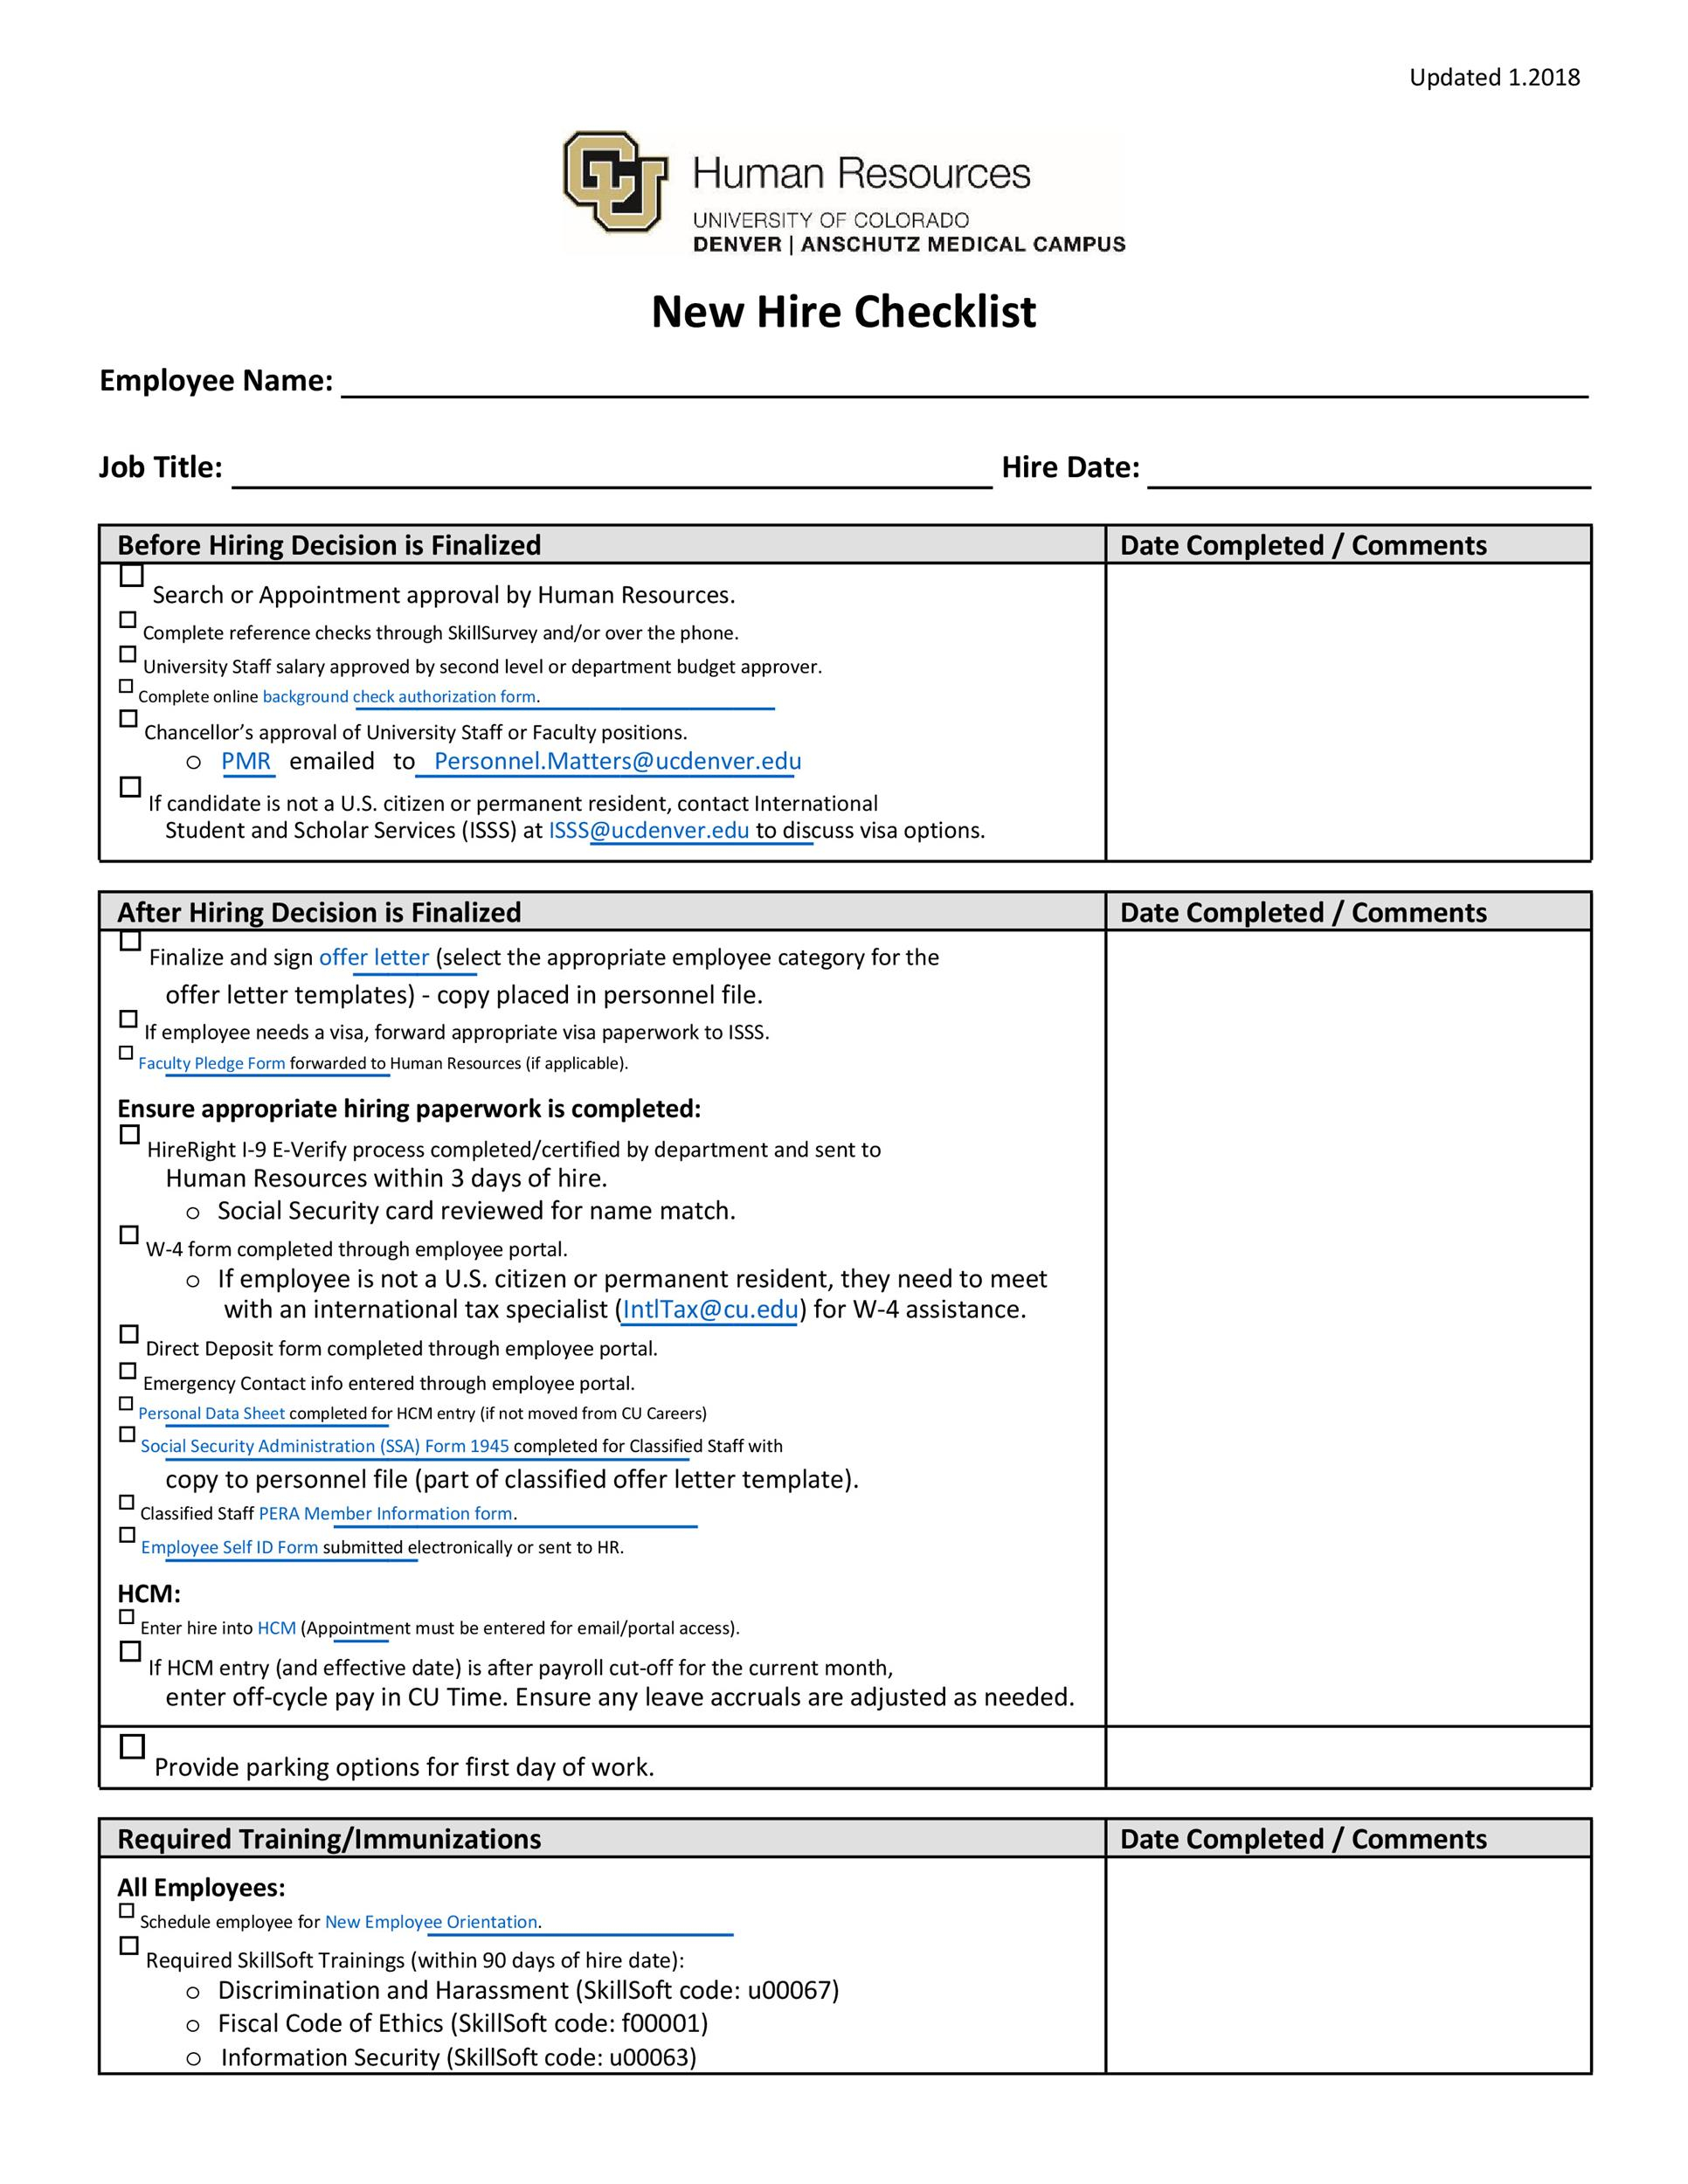 11 Useful New Hire Checklist Templates & Forms ᐅ TemplateLab In New Employee Training Checklist Template Intended For New Employee Training Checklist Template